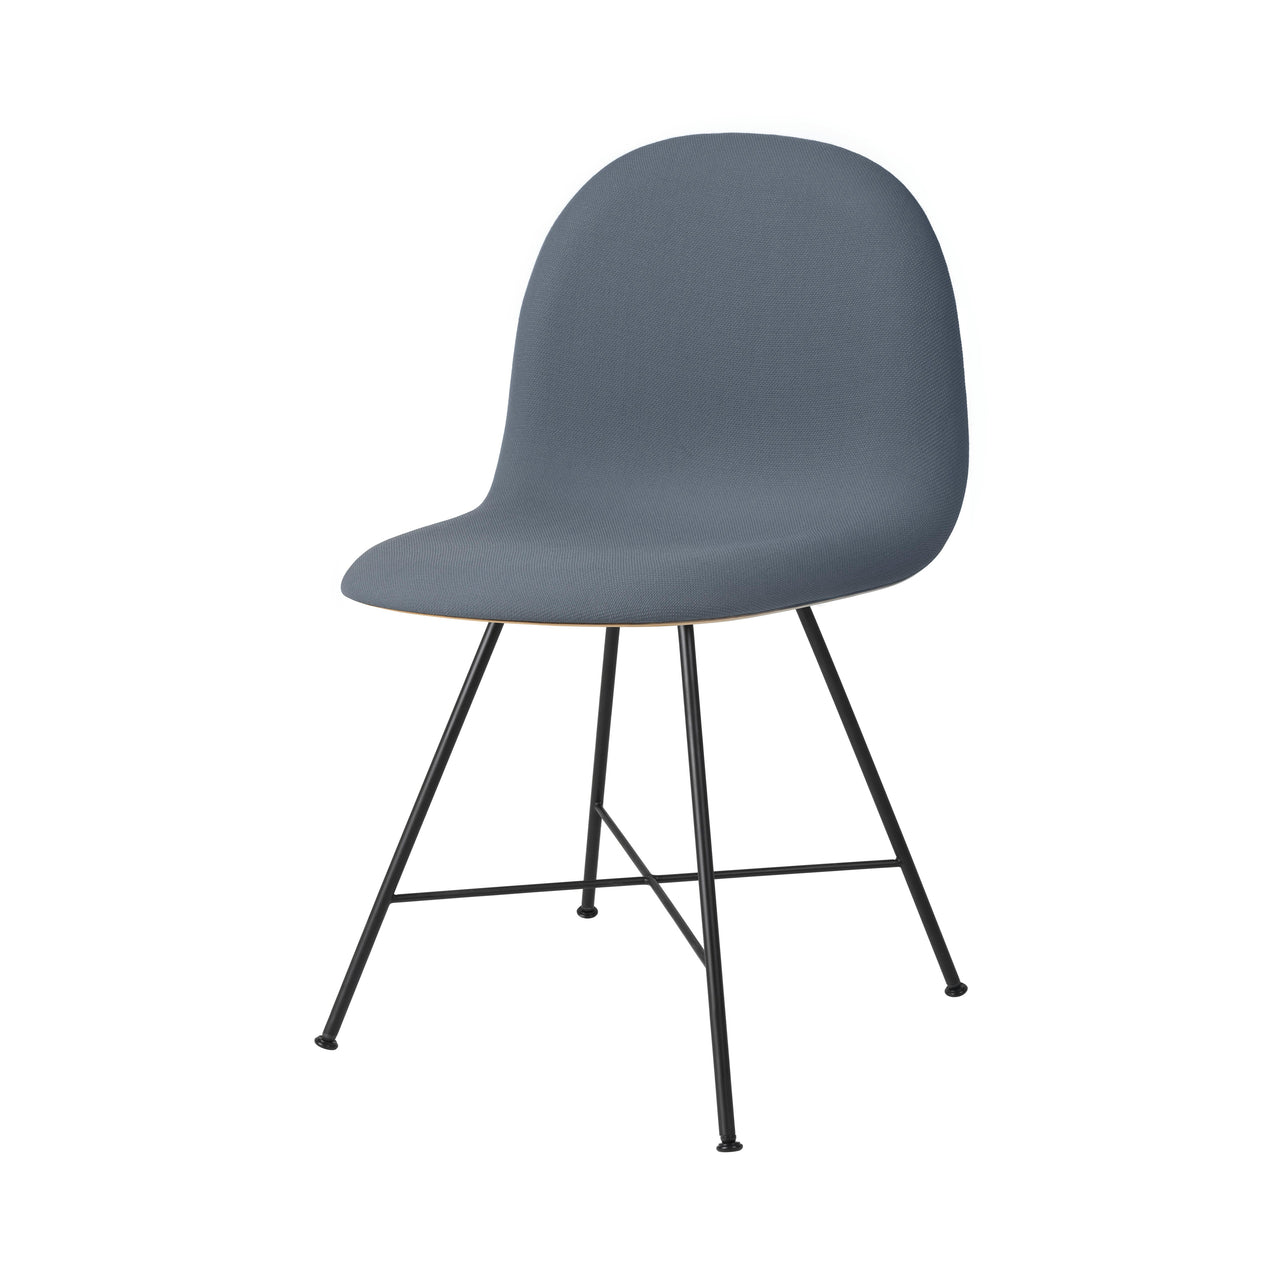 3D Dining Chair Center Base: Plastic Shell + Front Upholstered